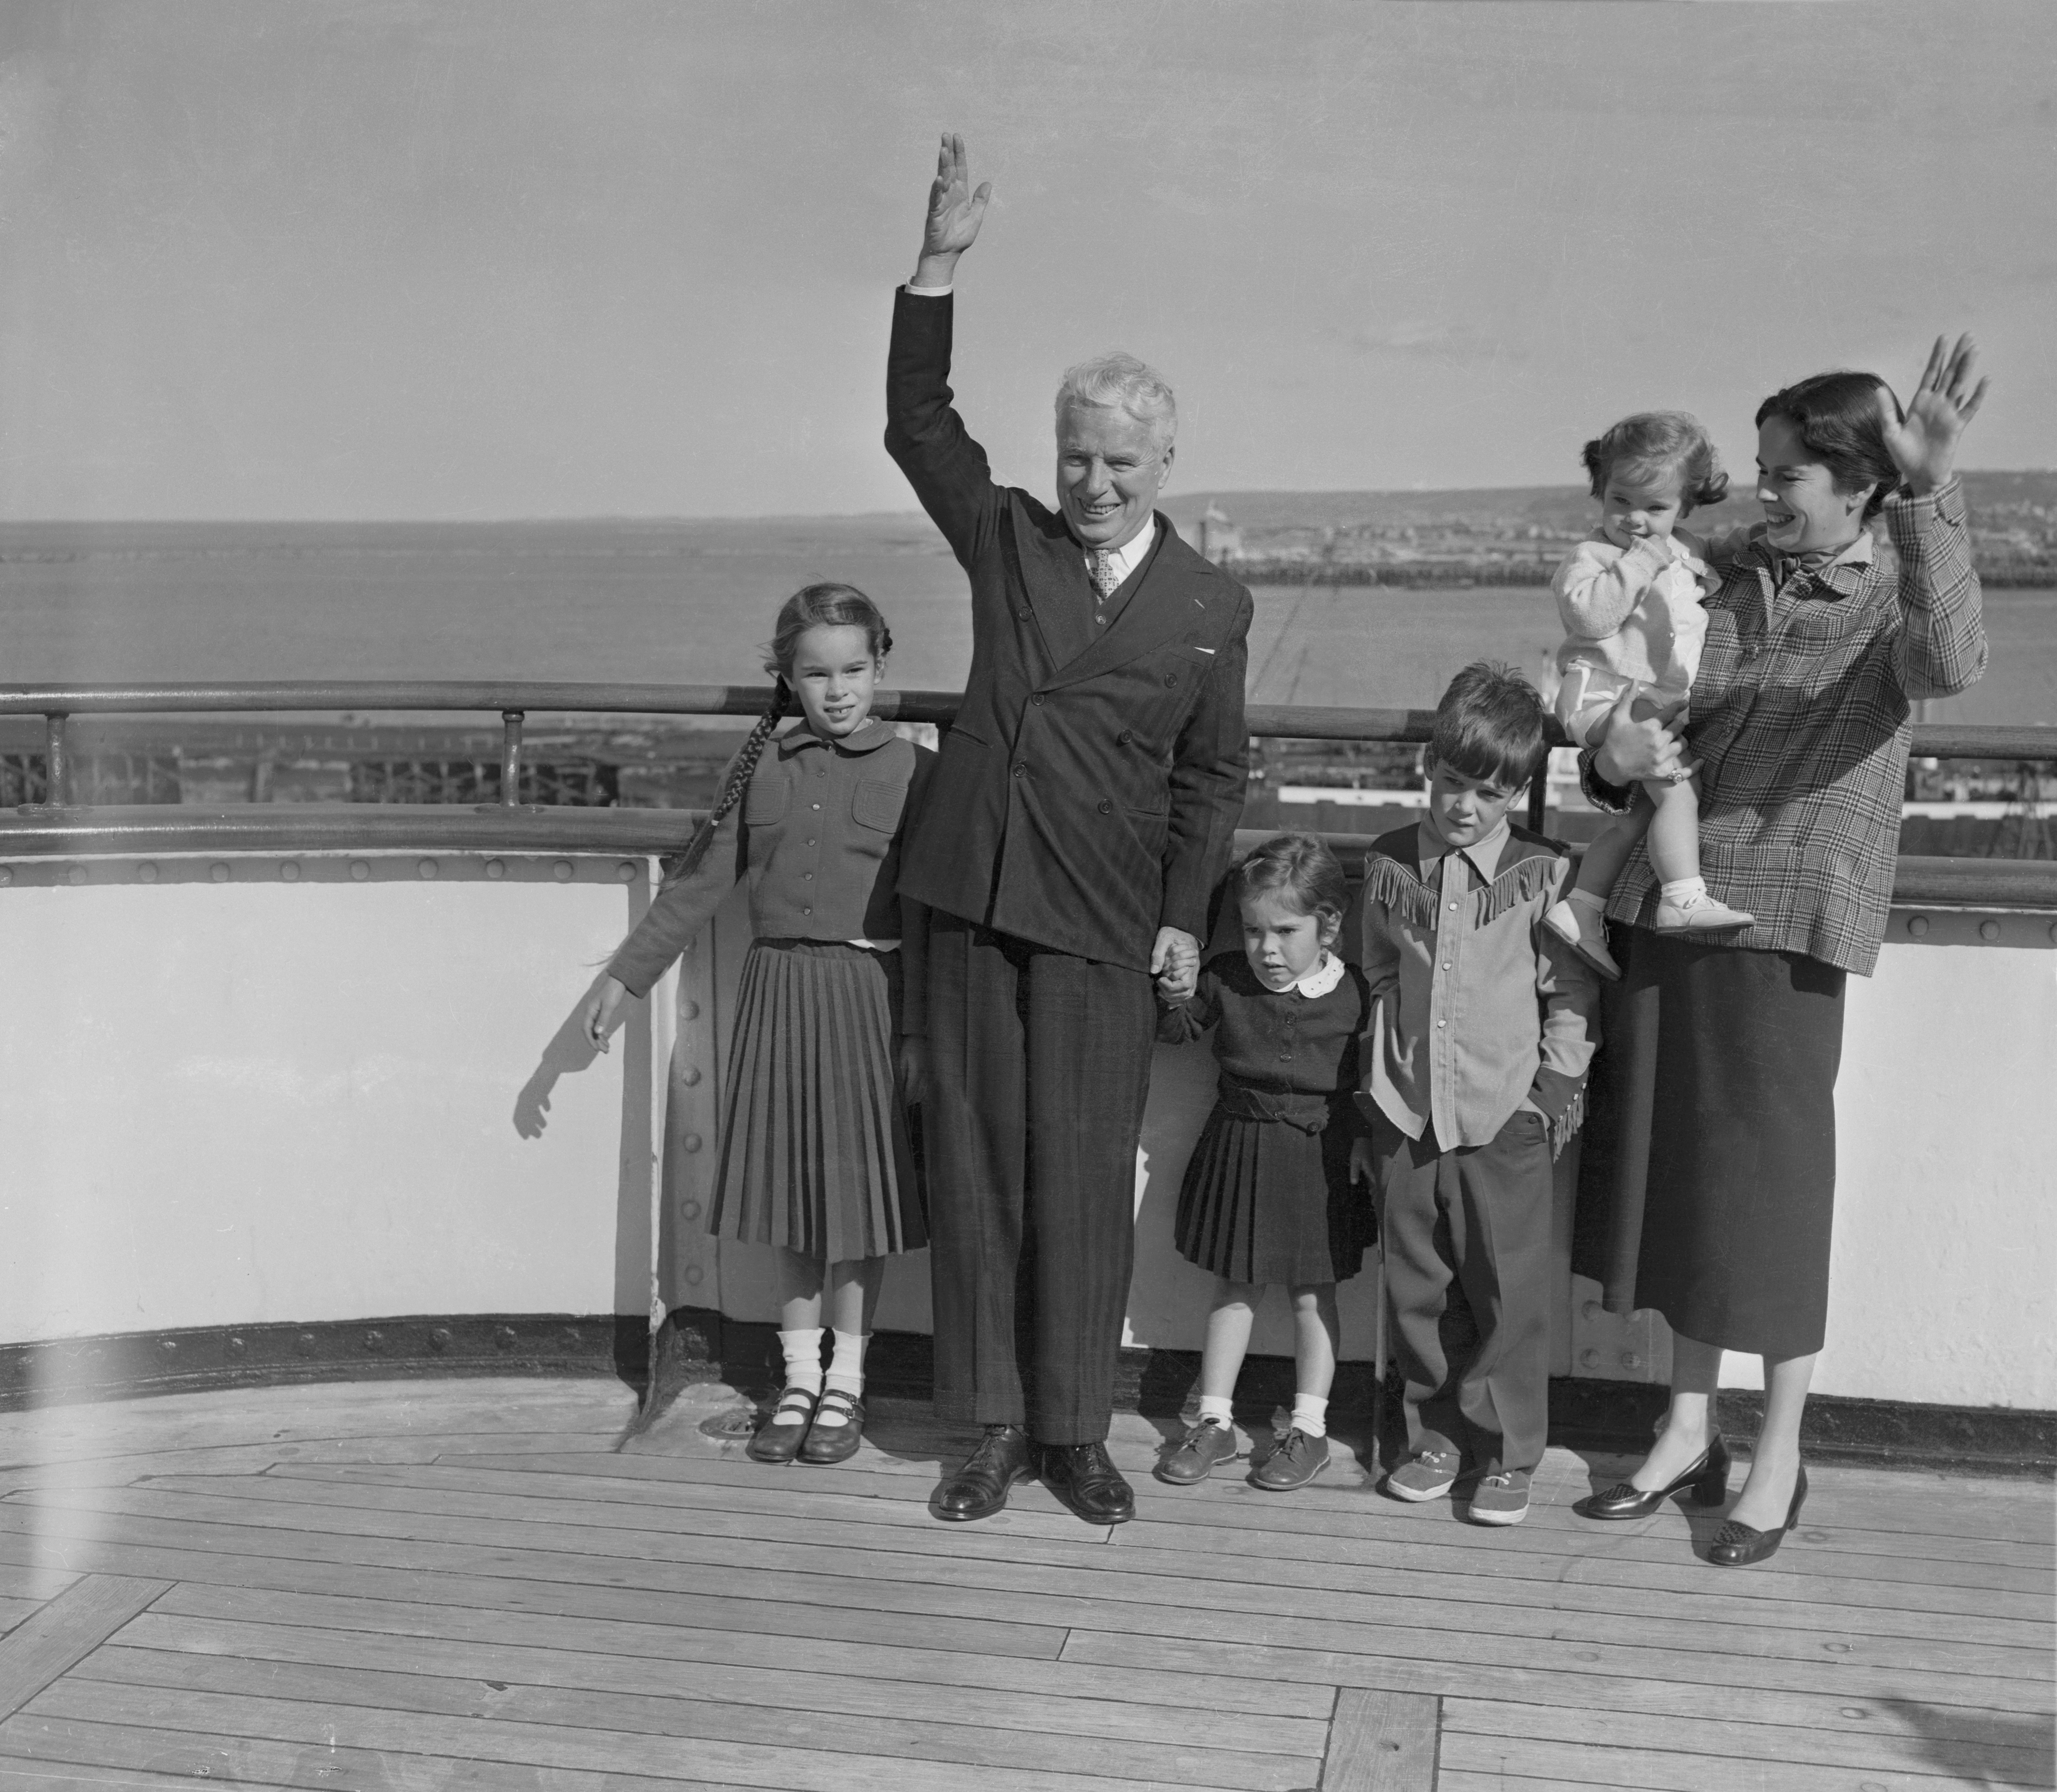 Charlie Chaplin arrives in Cherbourg, France, on the deck of the liner Queen Elizabeth, with his wife, Oona, and children on September 22, 1952 | Source: Getty Images